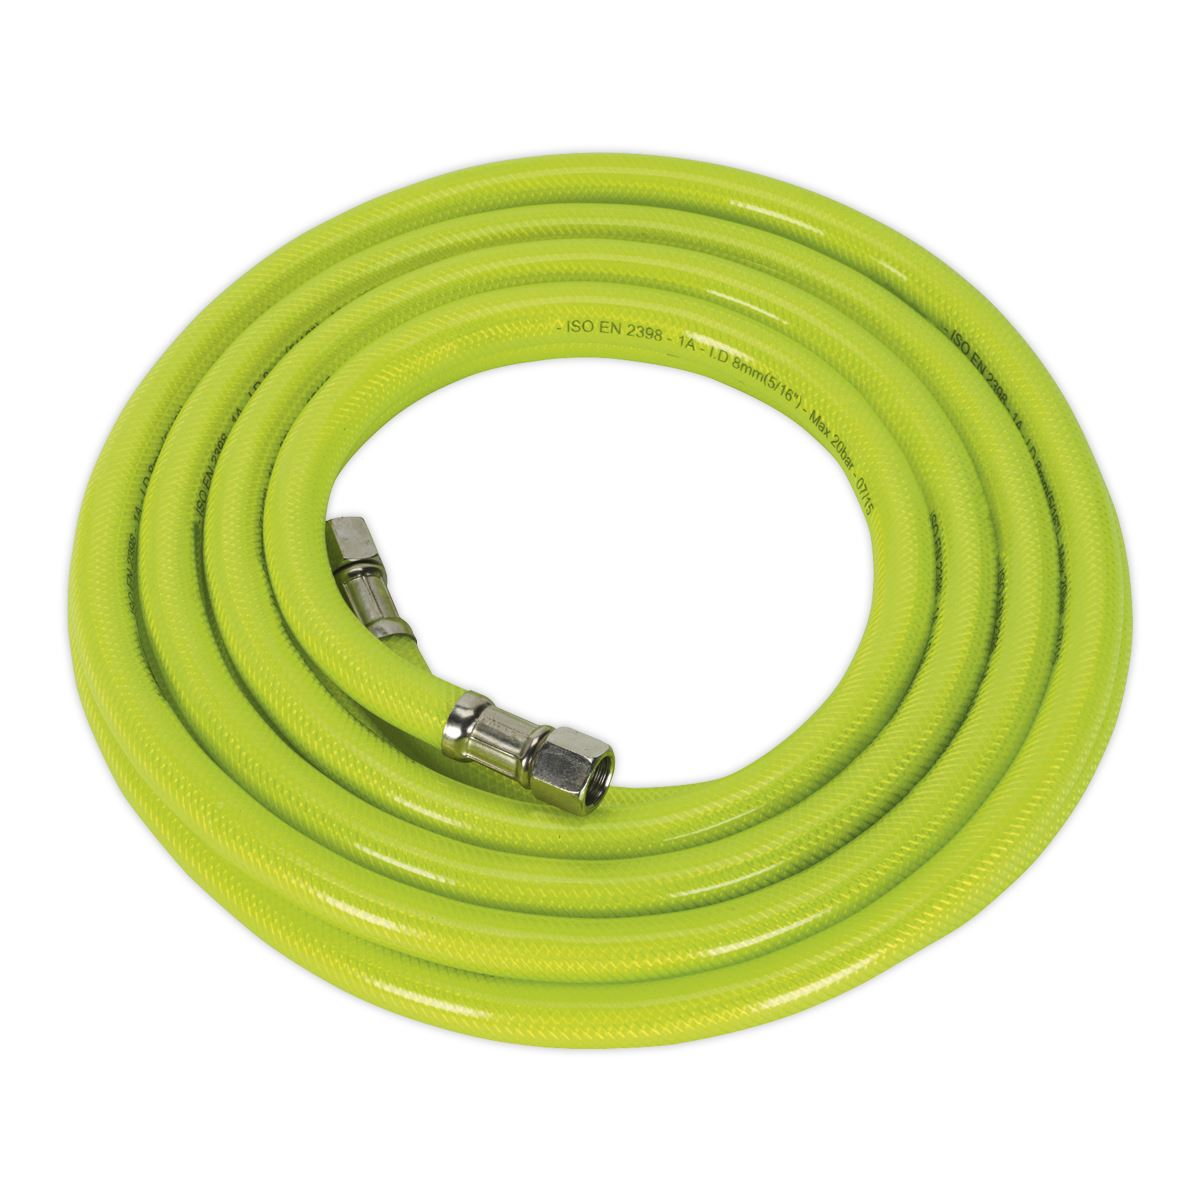 Sealey Air Hose High-Visibility 5m x Ø8mm with 1/4"BSP Unions